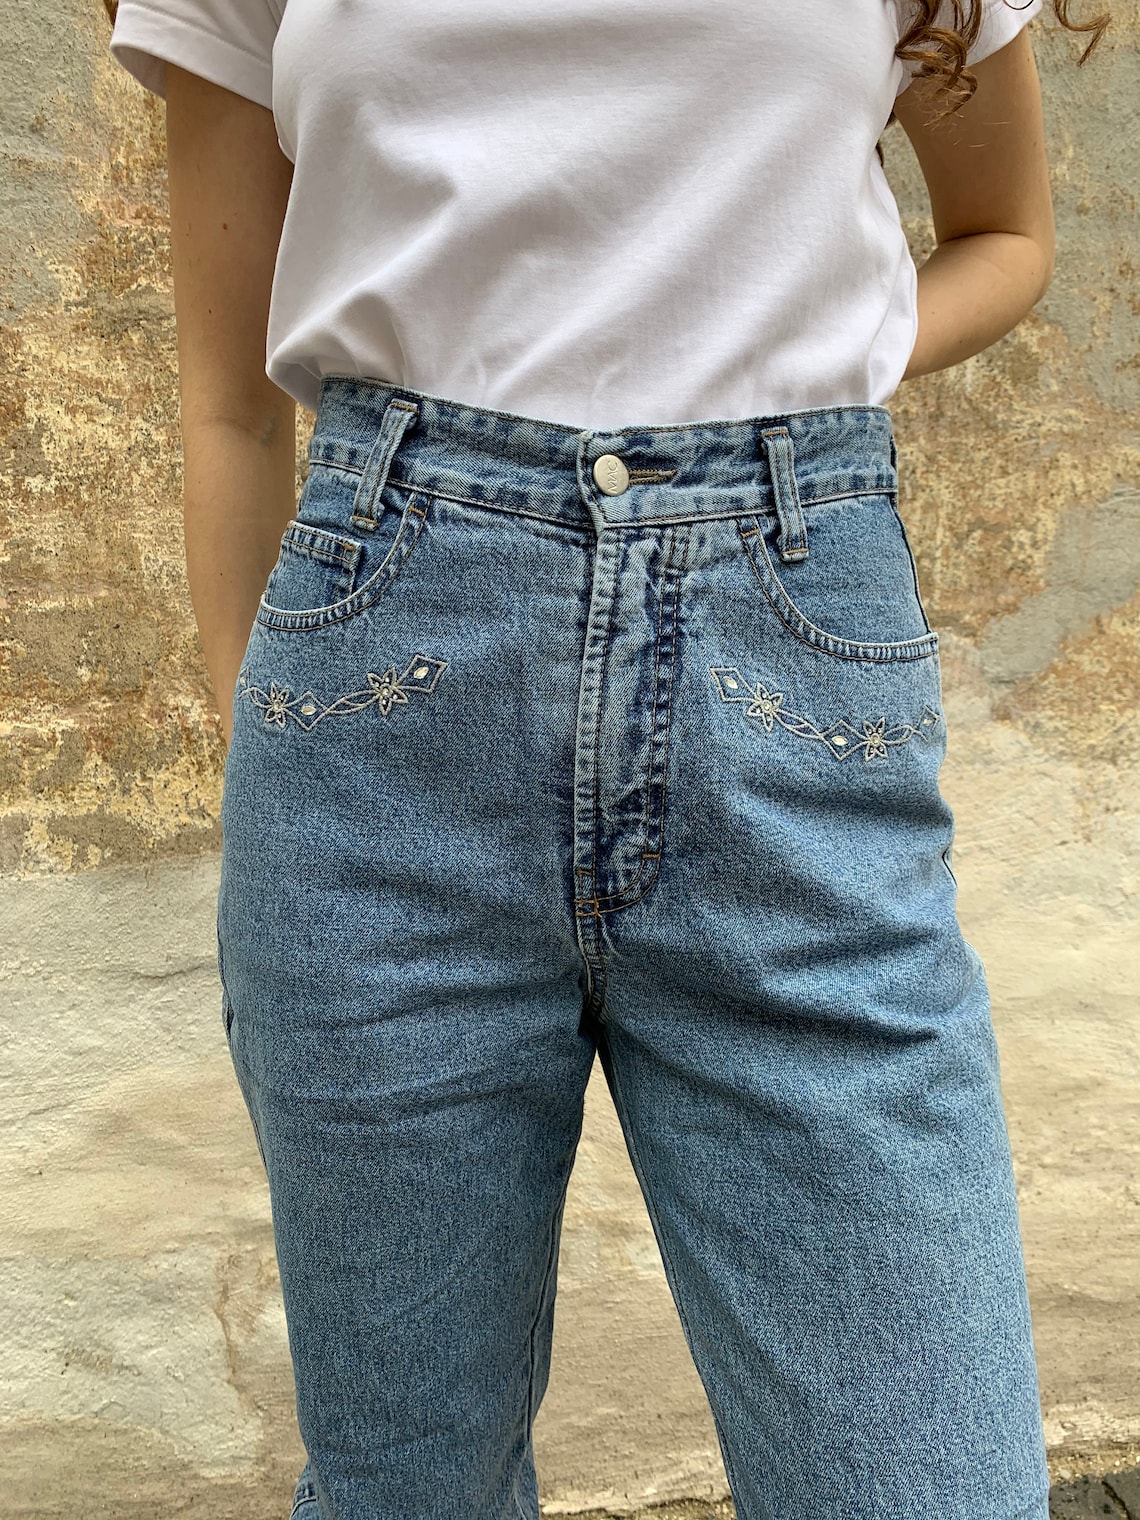 MAC Vintage High Waist Jeans in blue size S | Etsy